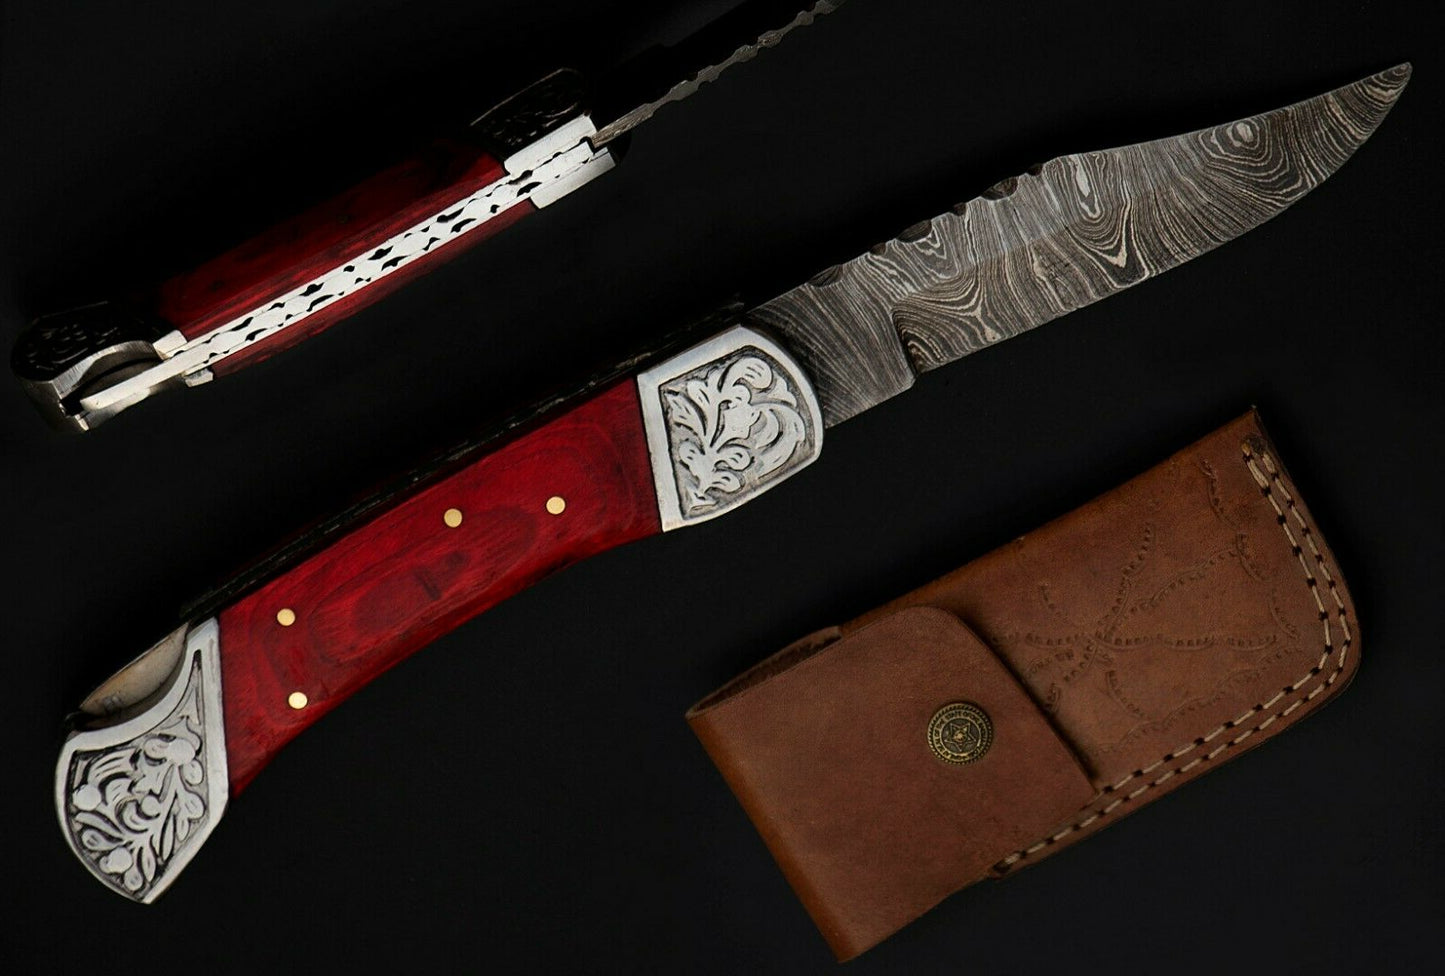 9" long back lock Folding Knife, Red wood Scale with Engraved steel bolster, custom made 4" Hand Forged Damascus steel blade, Cow hide leather sheath with belt loop